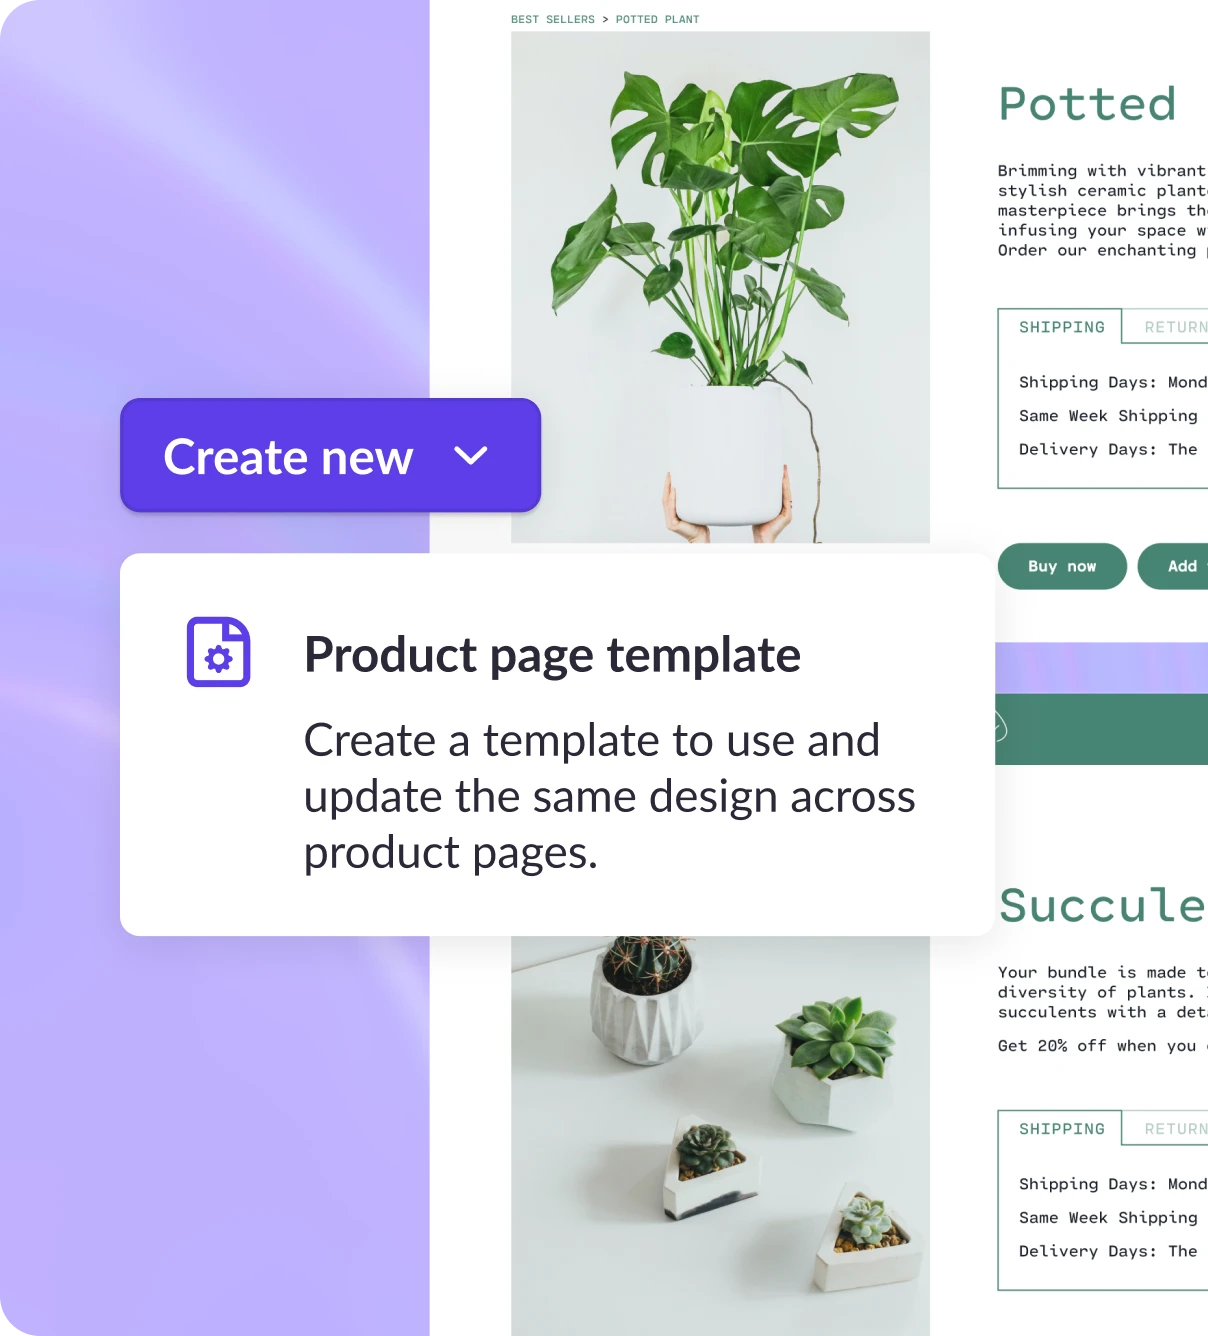 Creating a product page template in Shogun